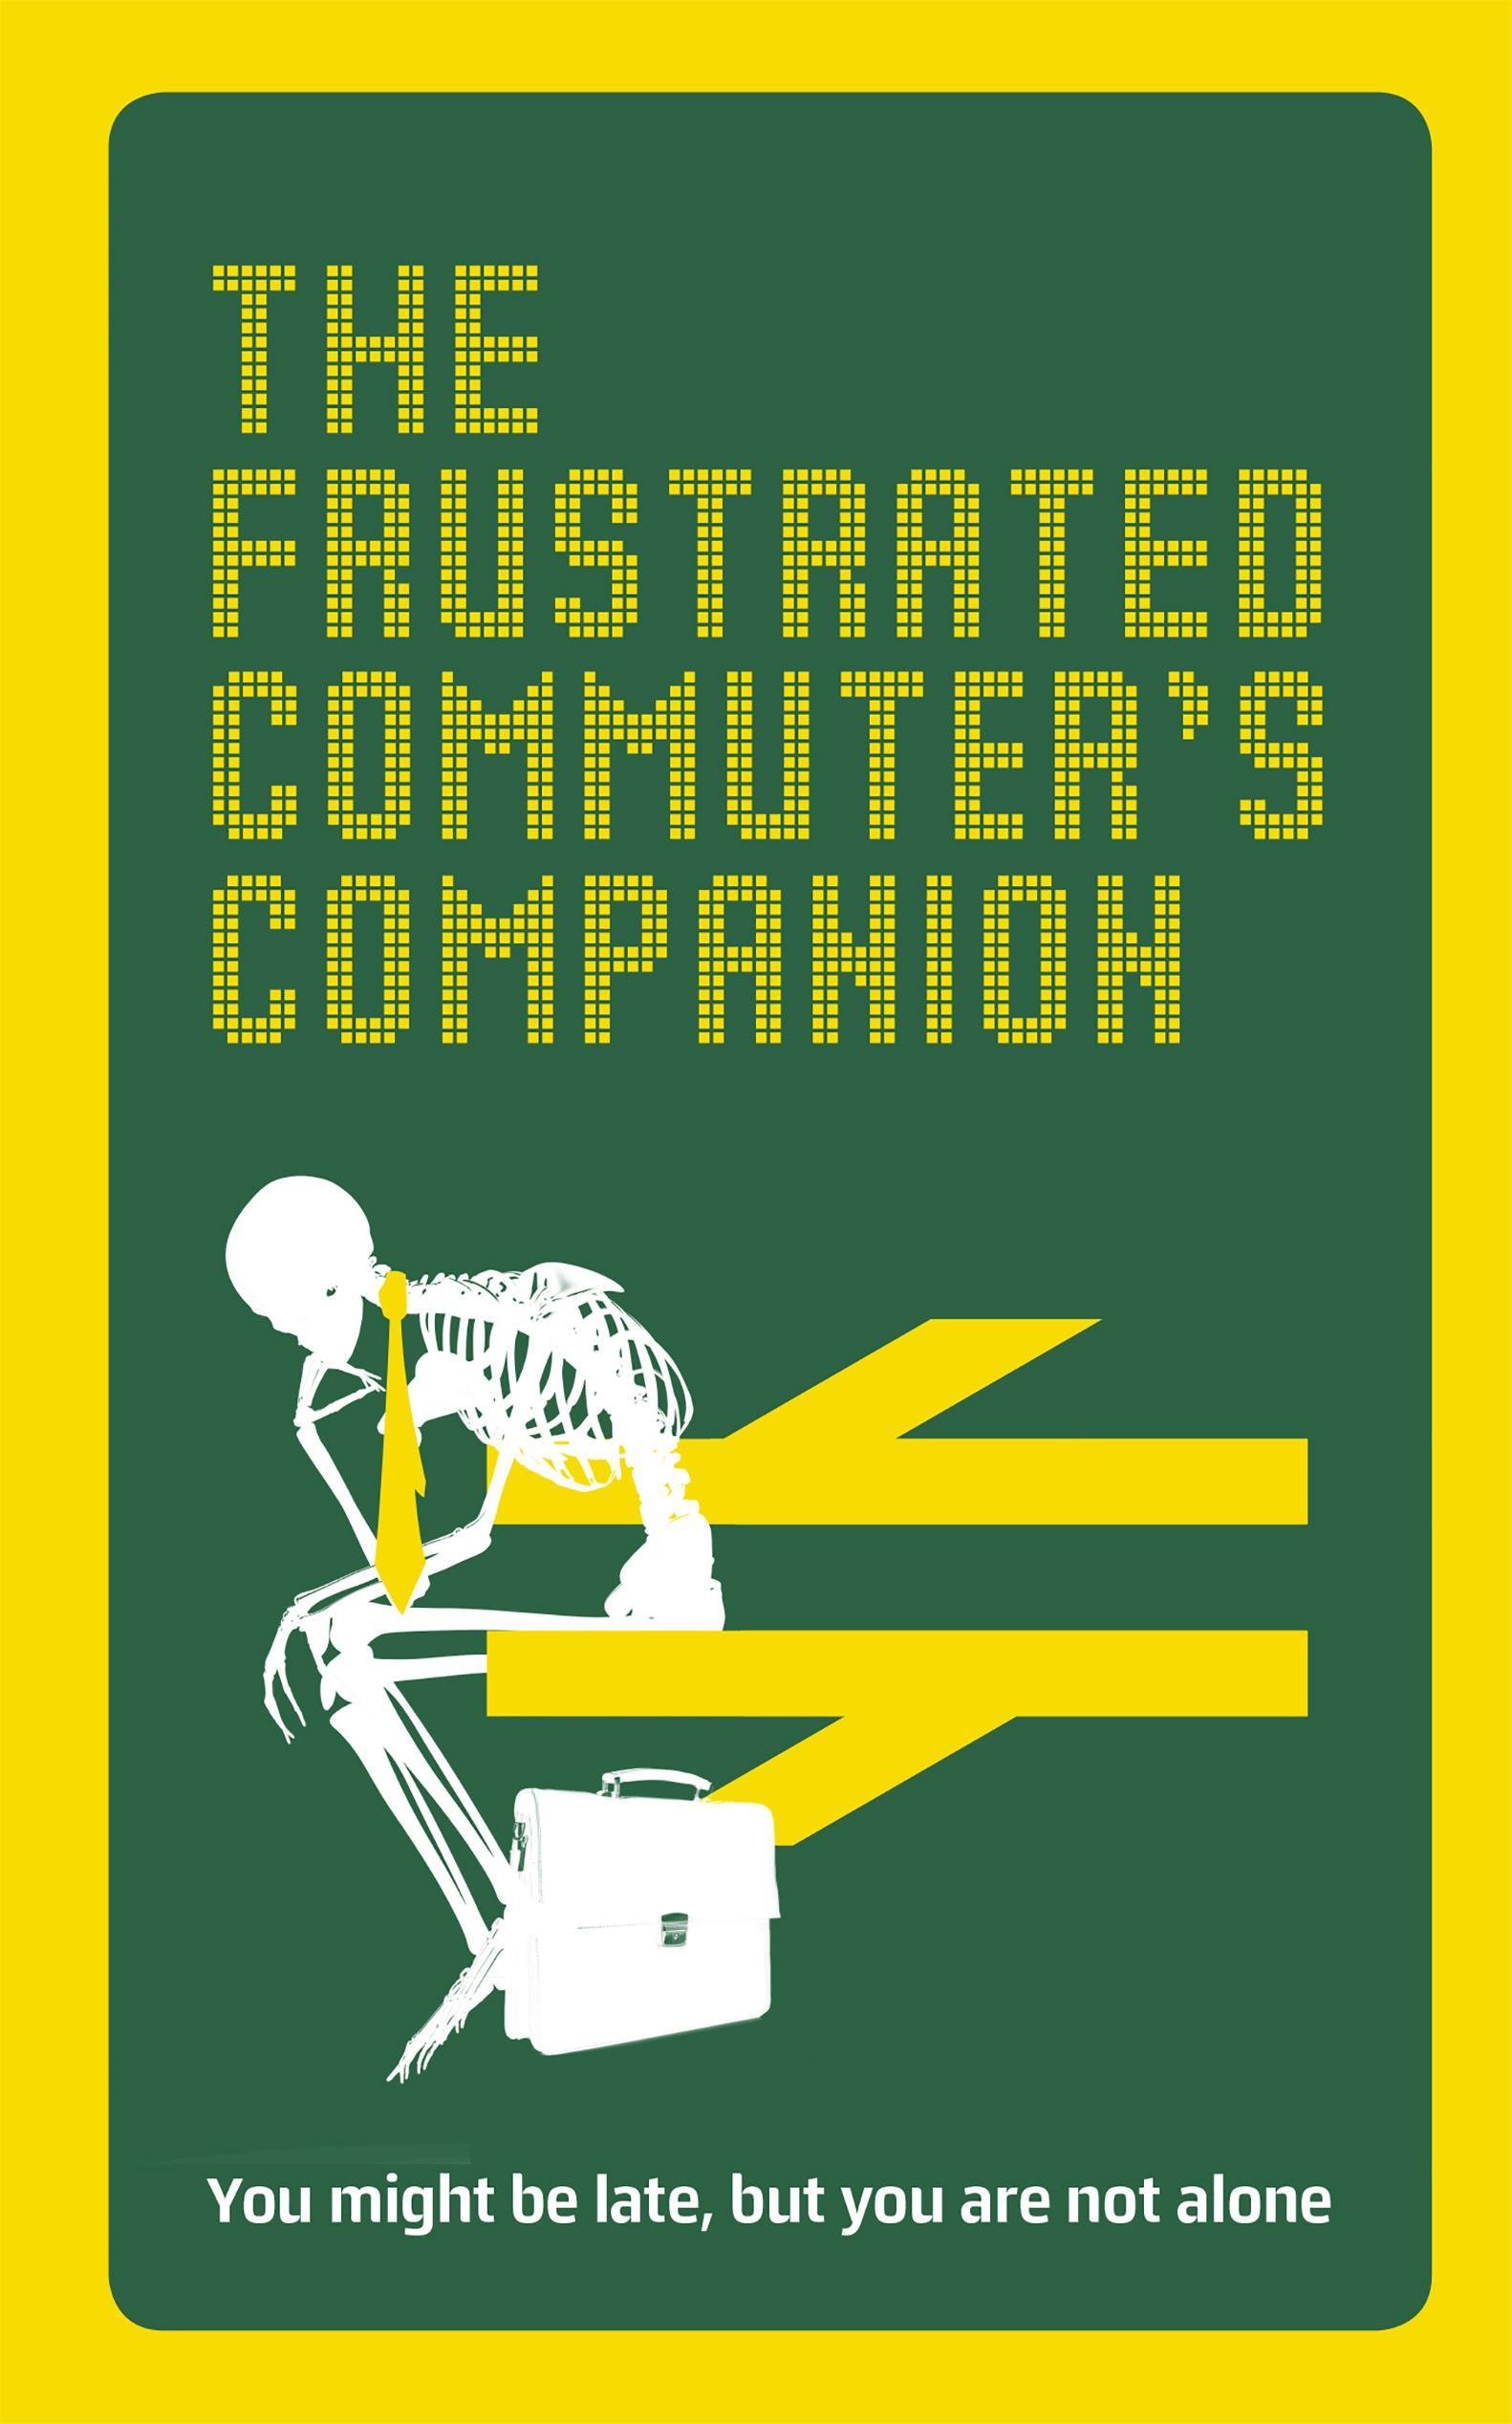 Frustrated Commuter's Companion